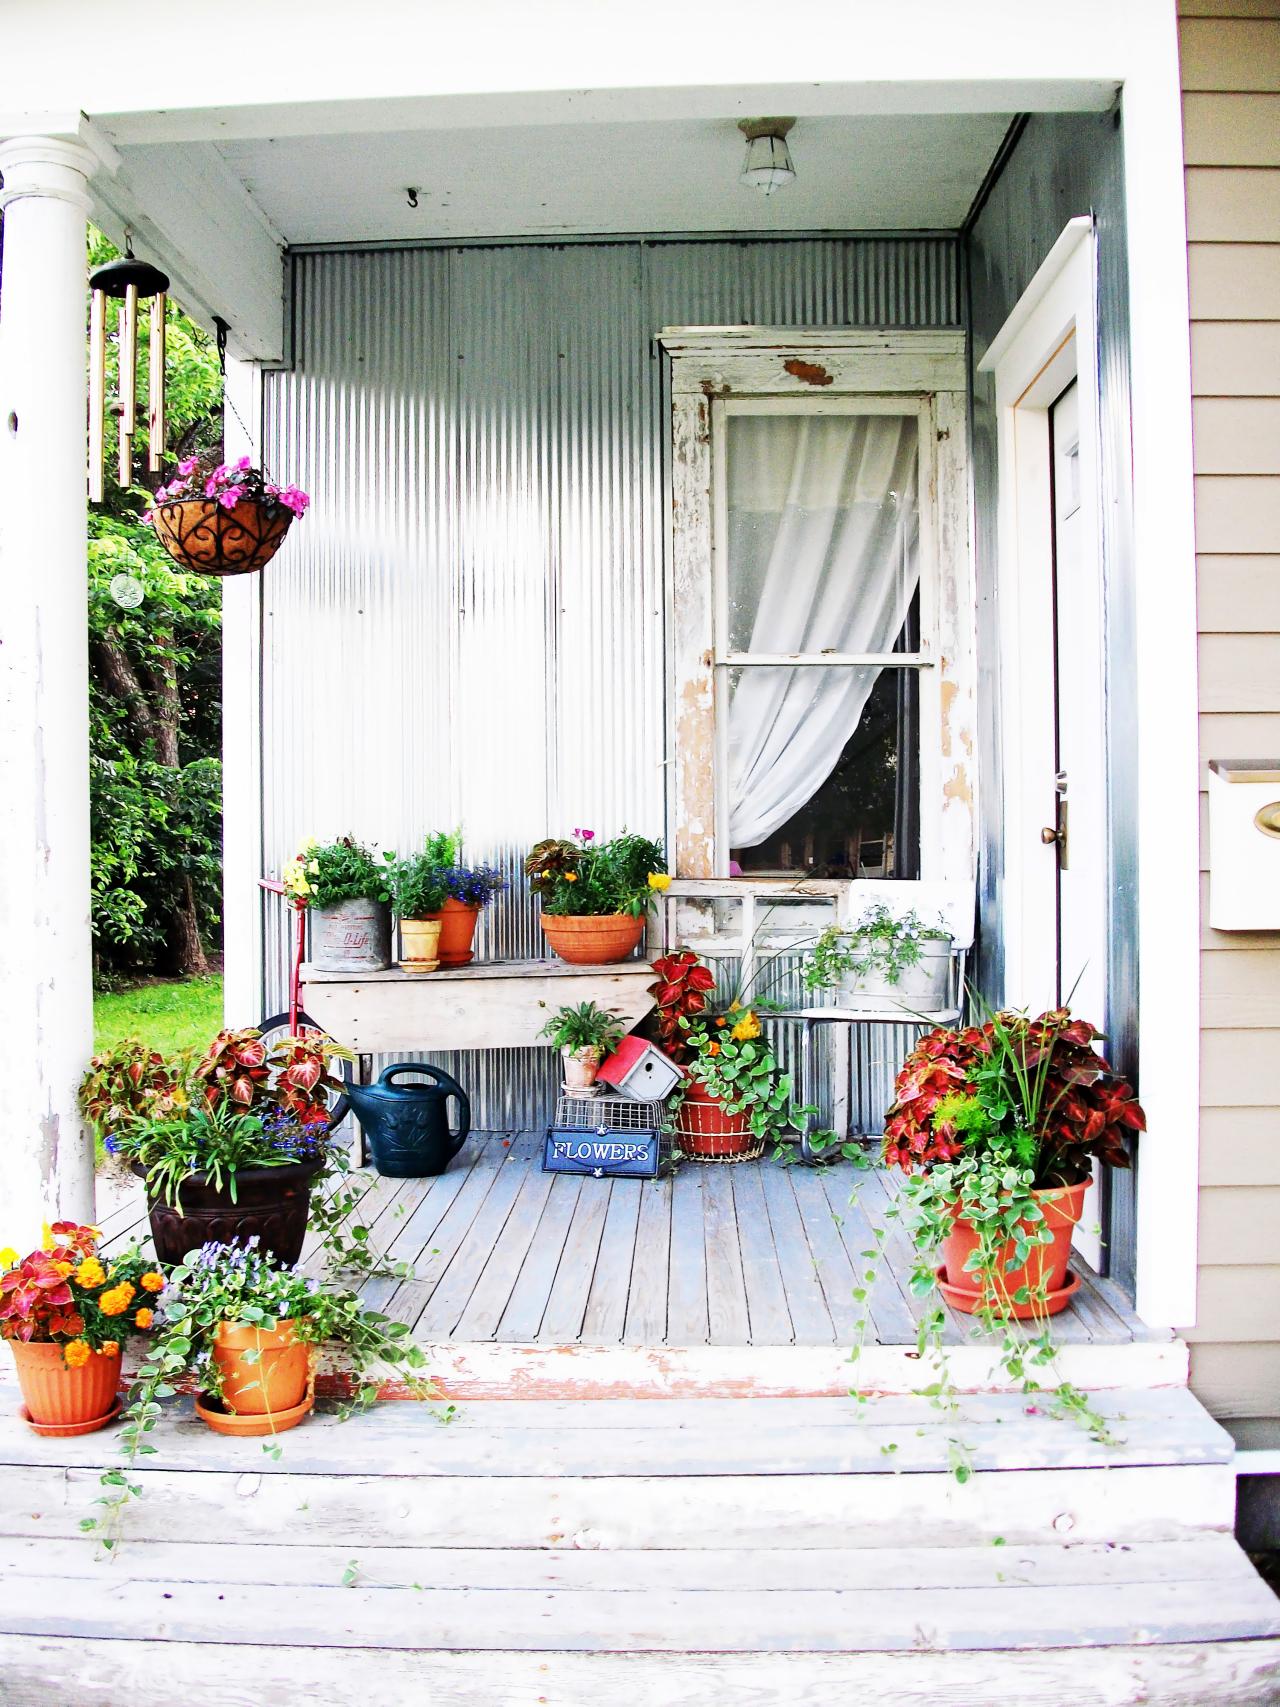 Shabby Chic Decorating Ideas for Porches and Gardens